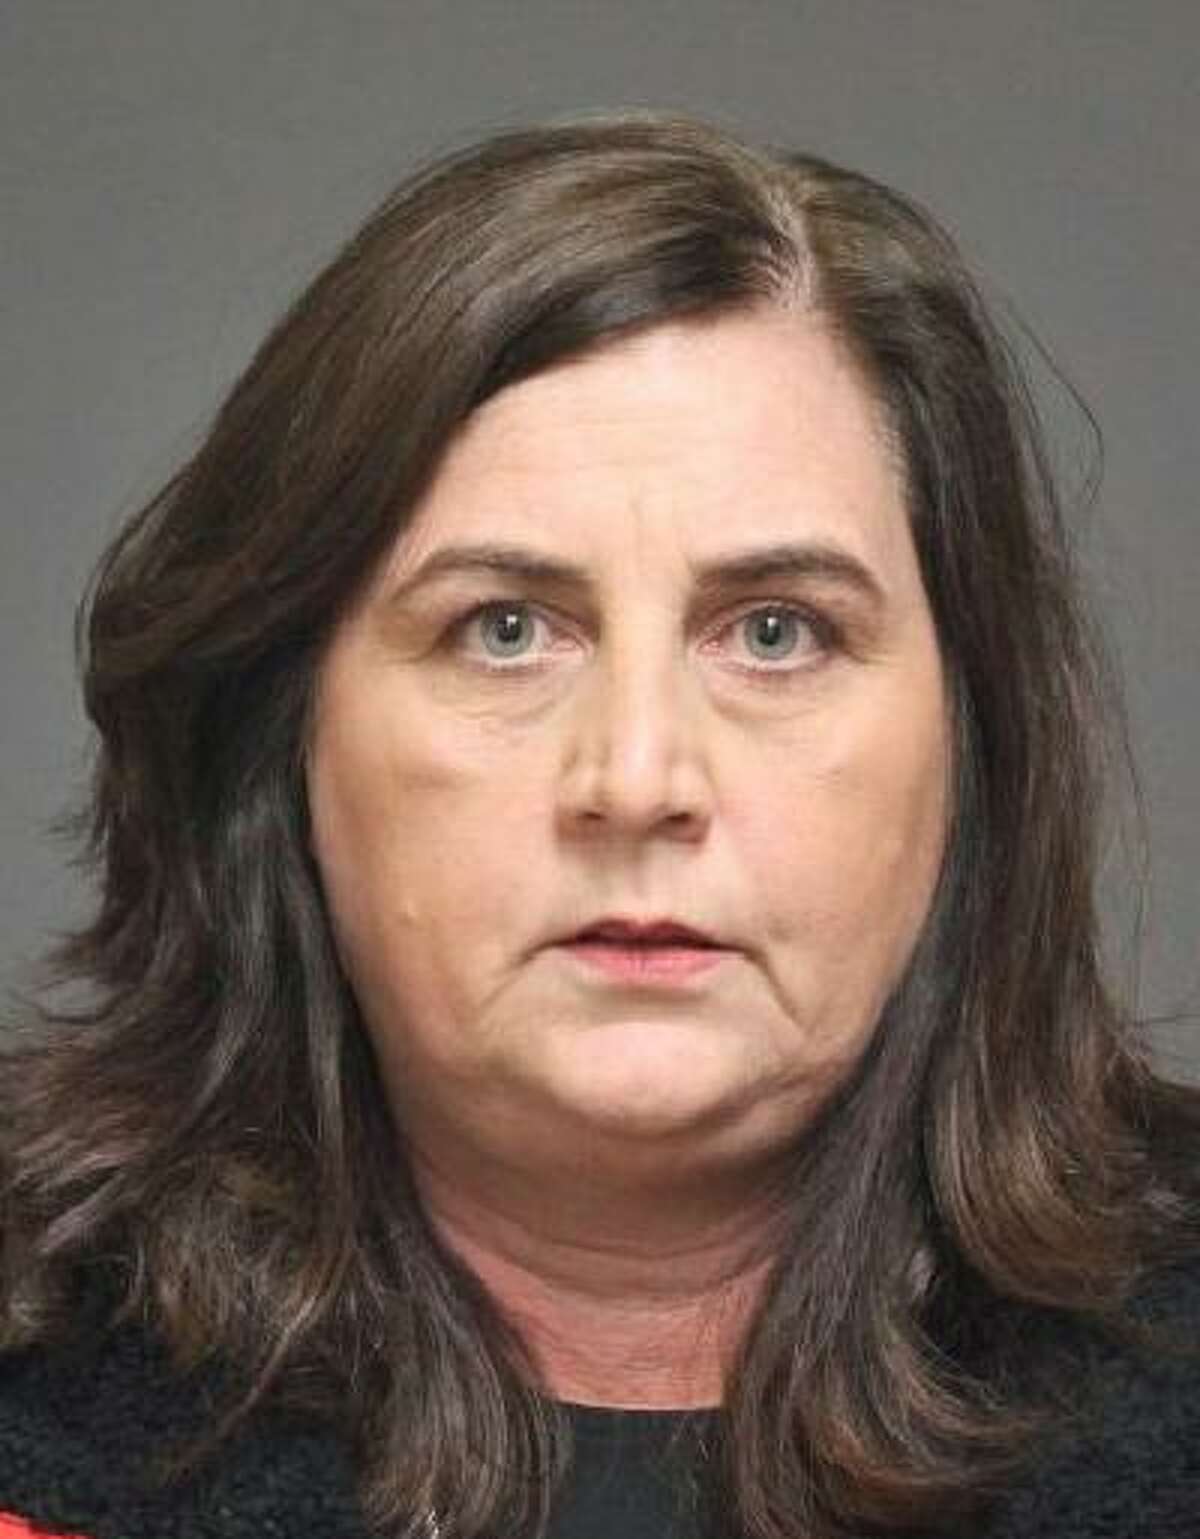 Former employee allegedly stole over $50k from medical practice